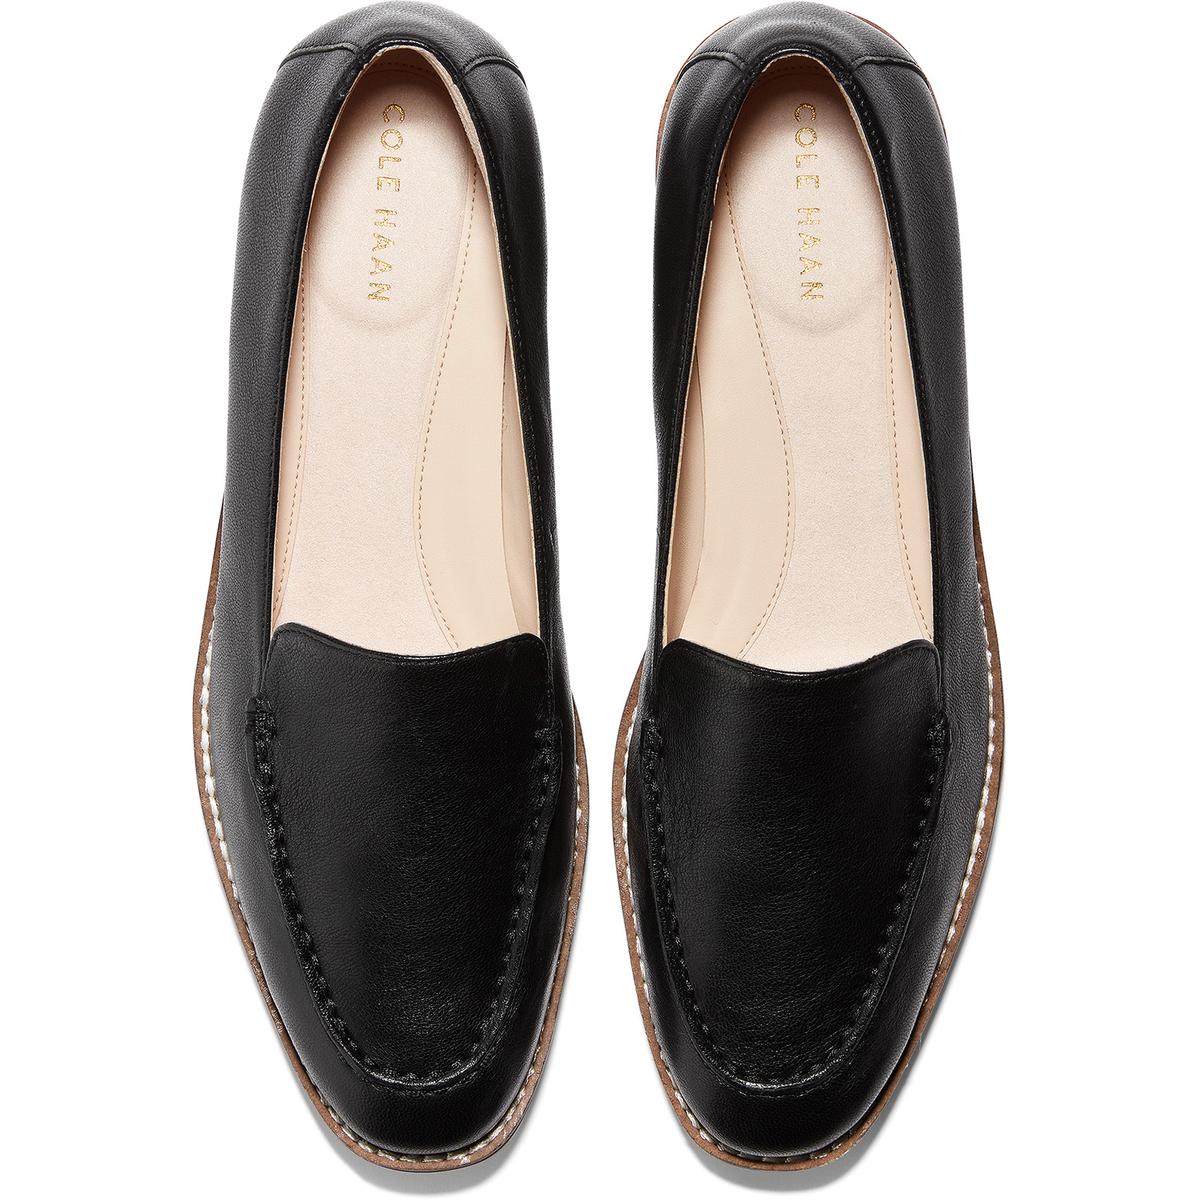 Cole Haan Womens The Go To Black Casual Loafers Shoes 8.5 Medium (B,M ...